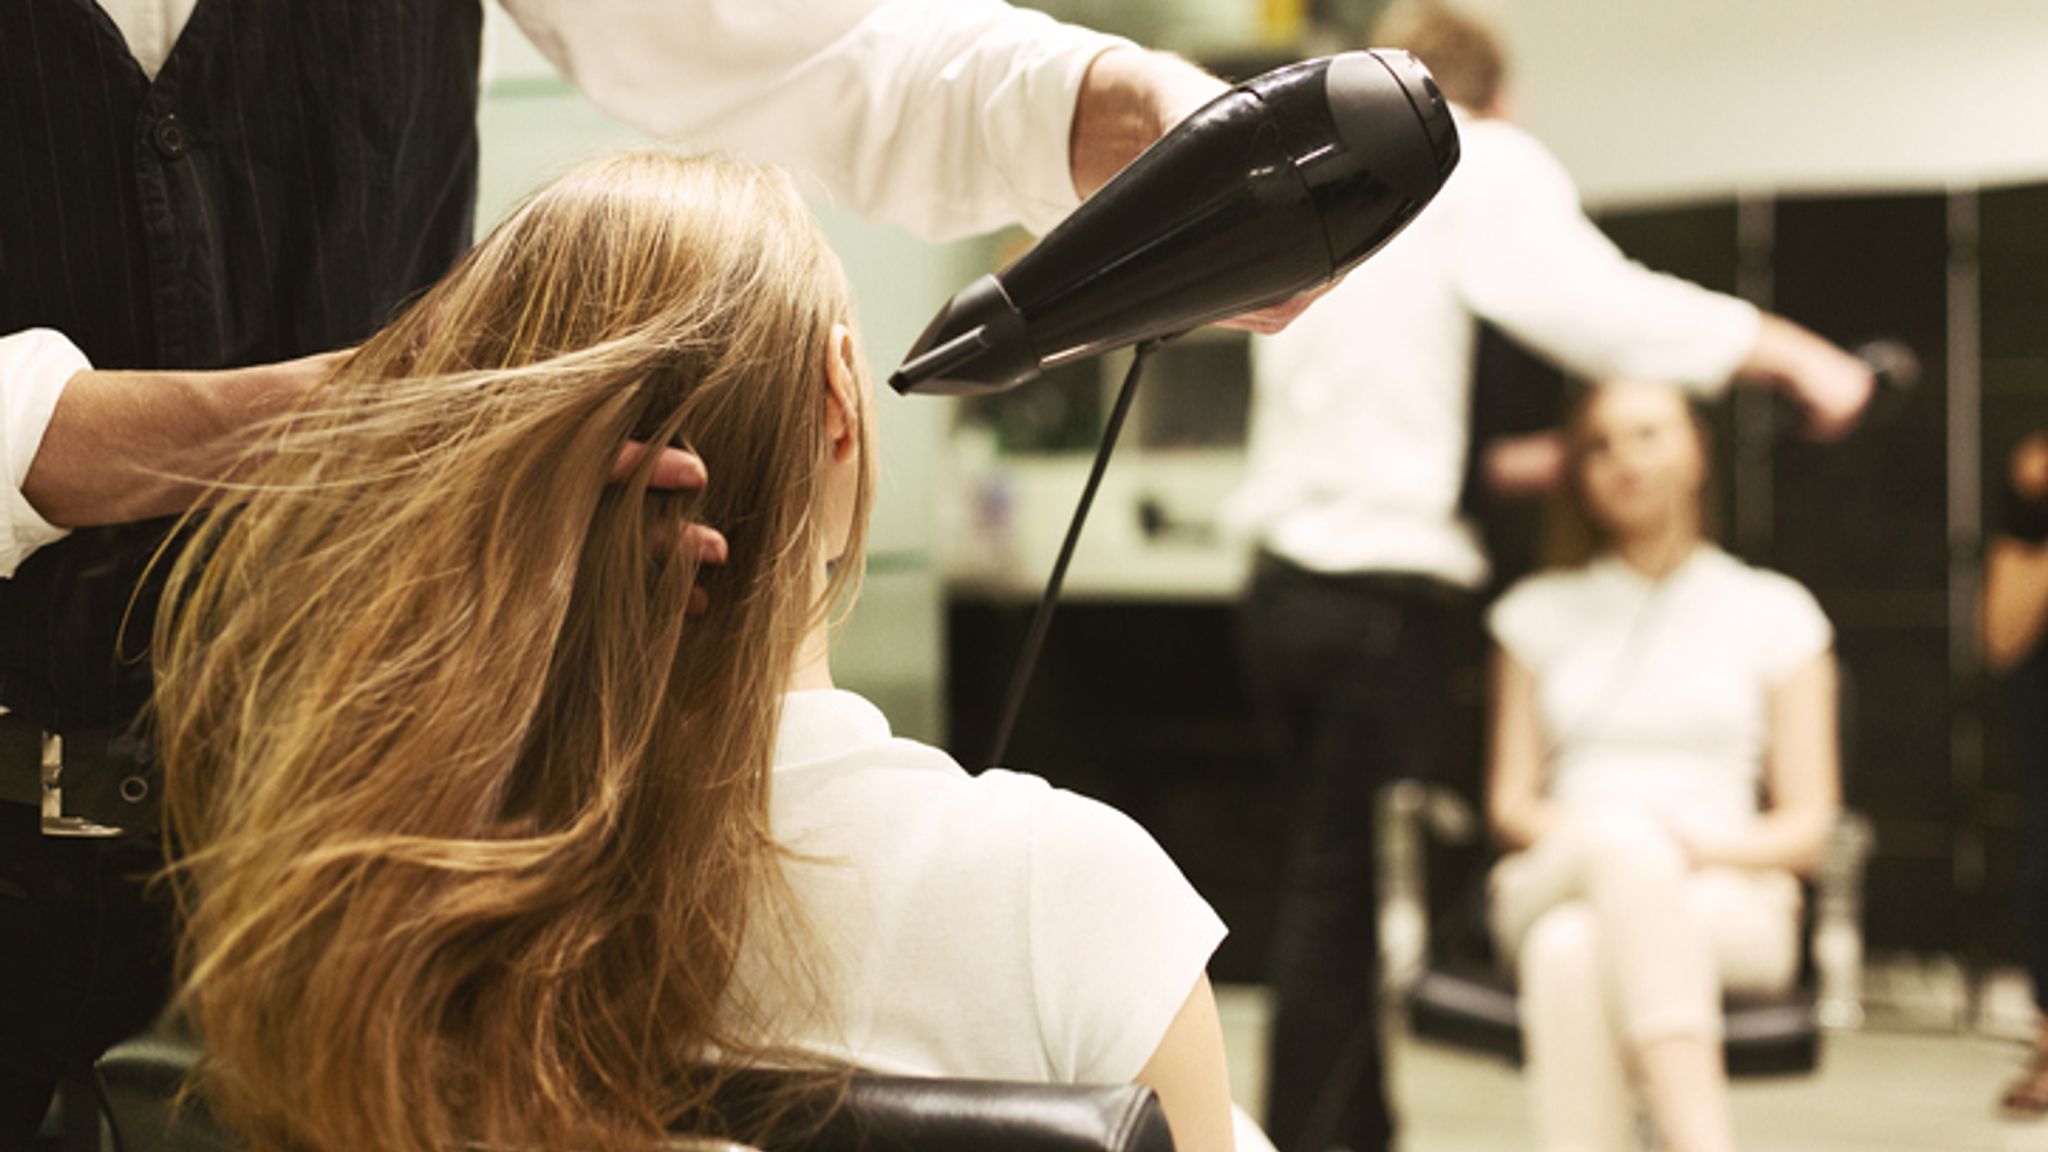 How To Choose The Best Keratin Hair Service Salon?